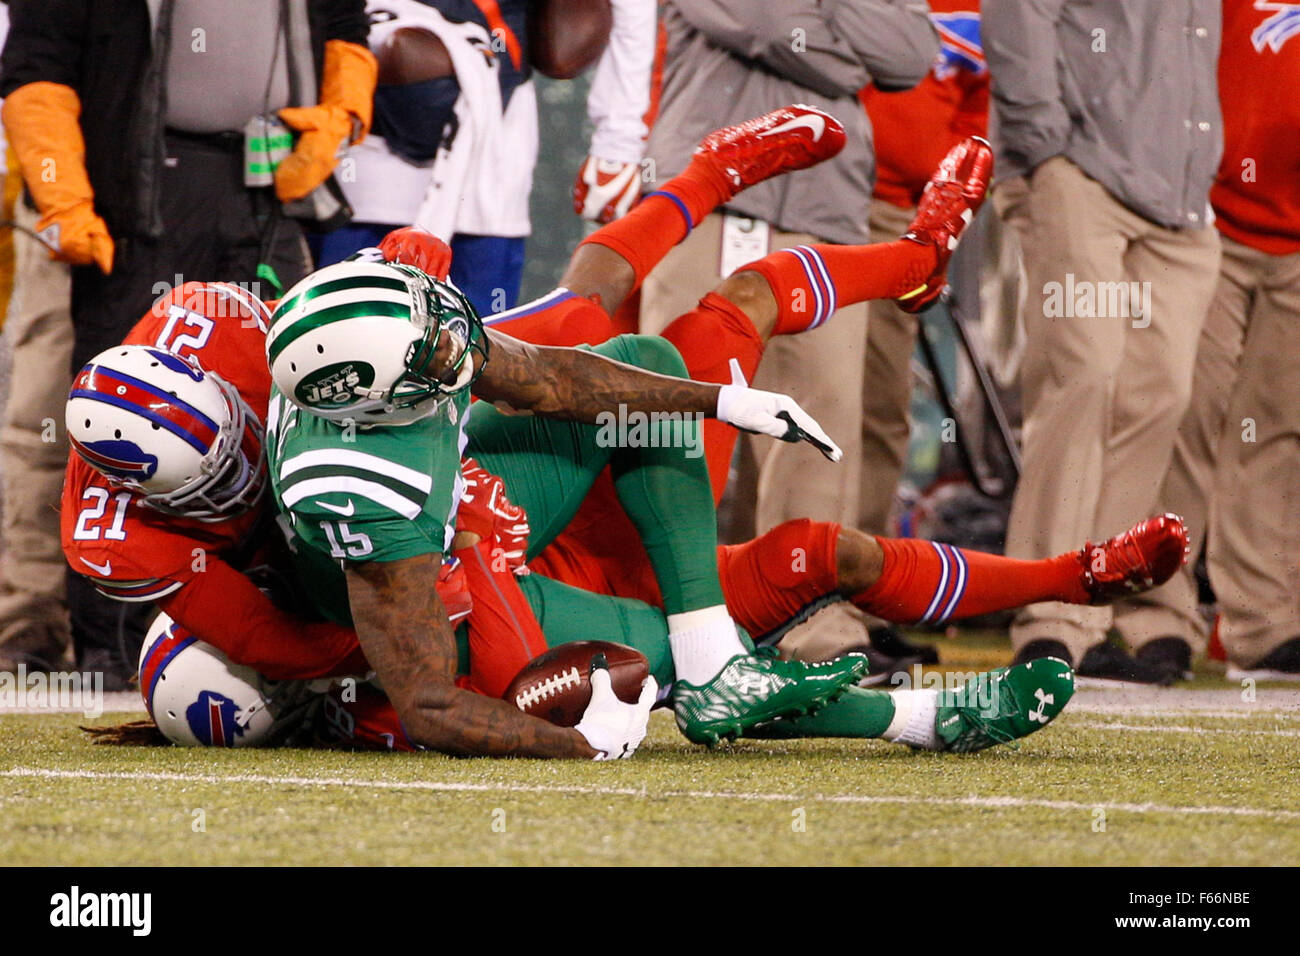 East Rutherford, New Jersey, USA. 12th Nov, 2015. New York Jets wide receiver Brandon Marshall (15) gets tackled by Buffalo Bills cornerback Leodis McKelvin (21) and cornerback Ronald Darby (28) after making the catch during the NFL game between the Buffalo Bills and the New York Jets at MetLife Stadium in East Rutherford, New Jersey. The Buffalo Bills won 22-17. Christopher Szagola/CSM/Alamy Live News Stock Photo